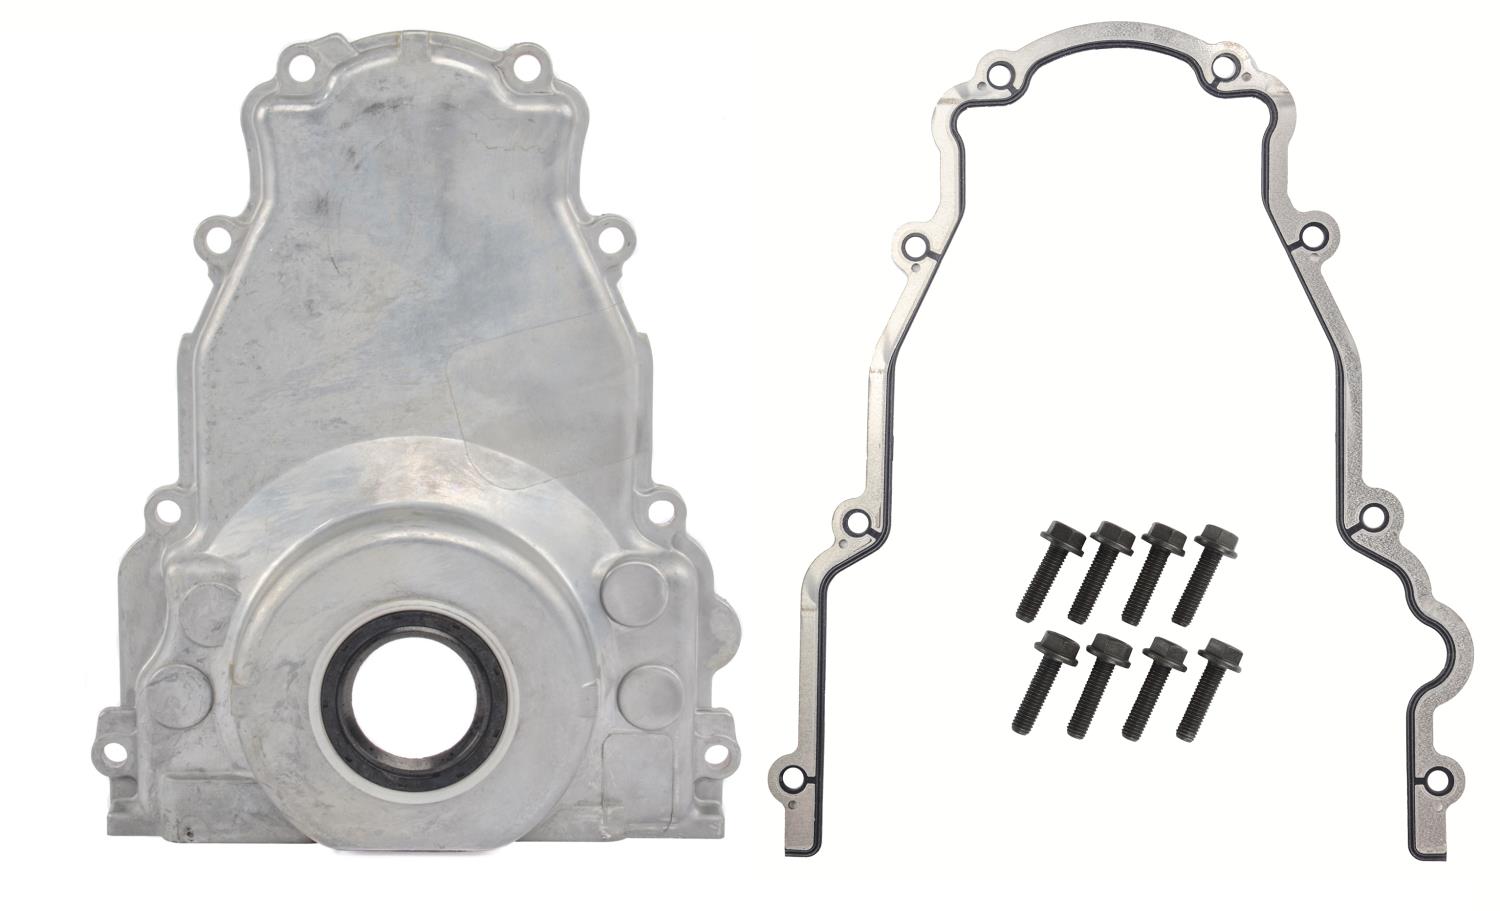 Timing Cover Kit for GM LS1 and LS6